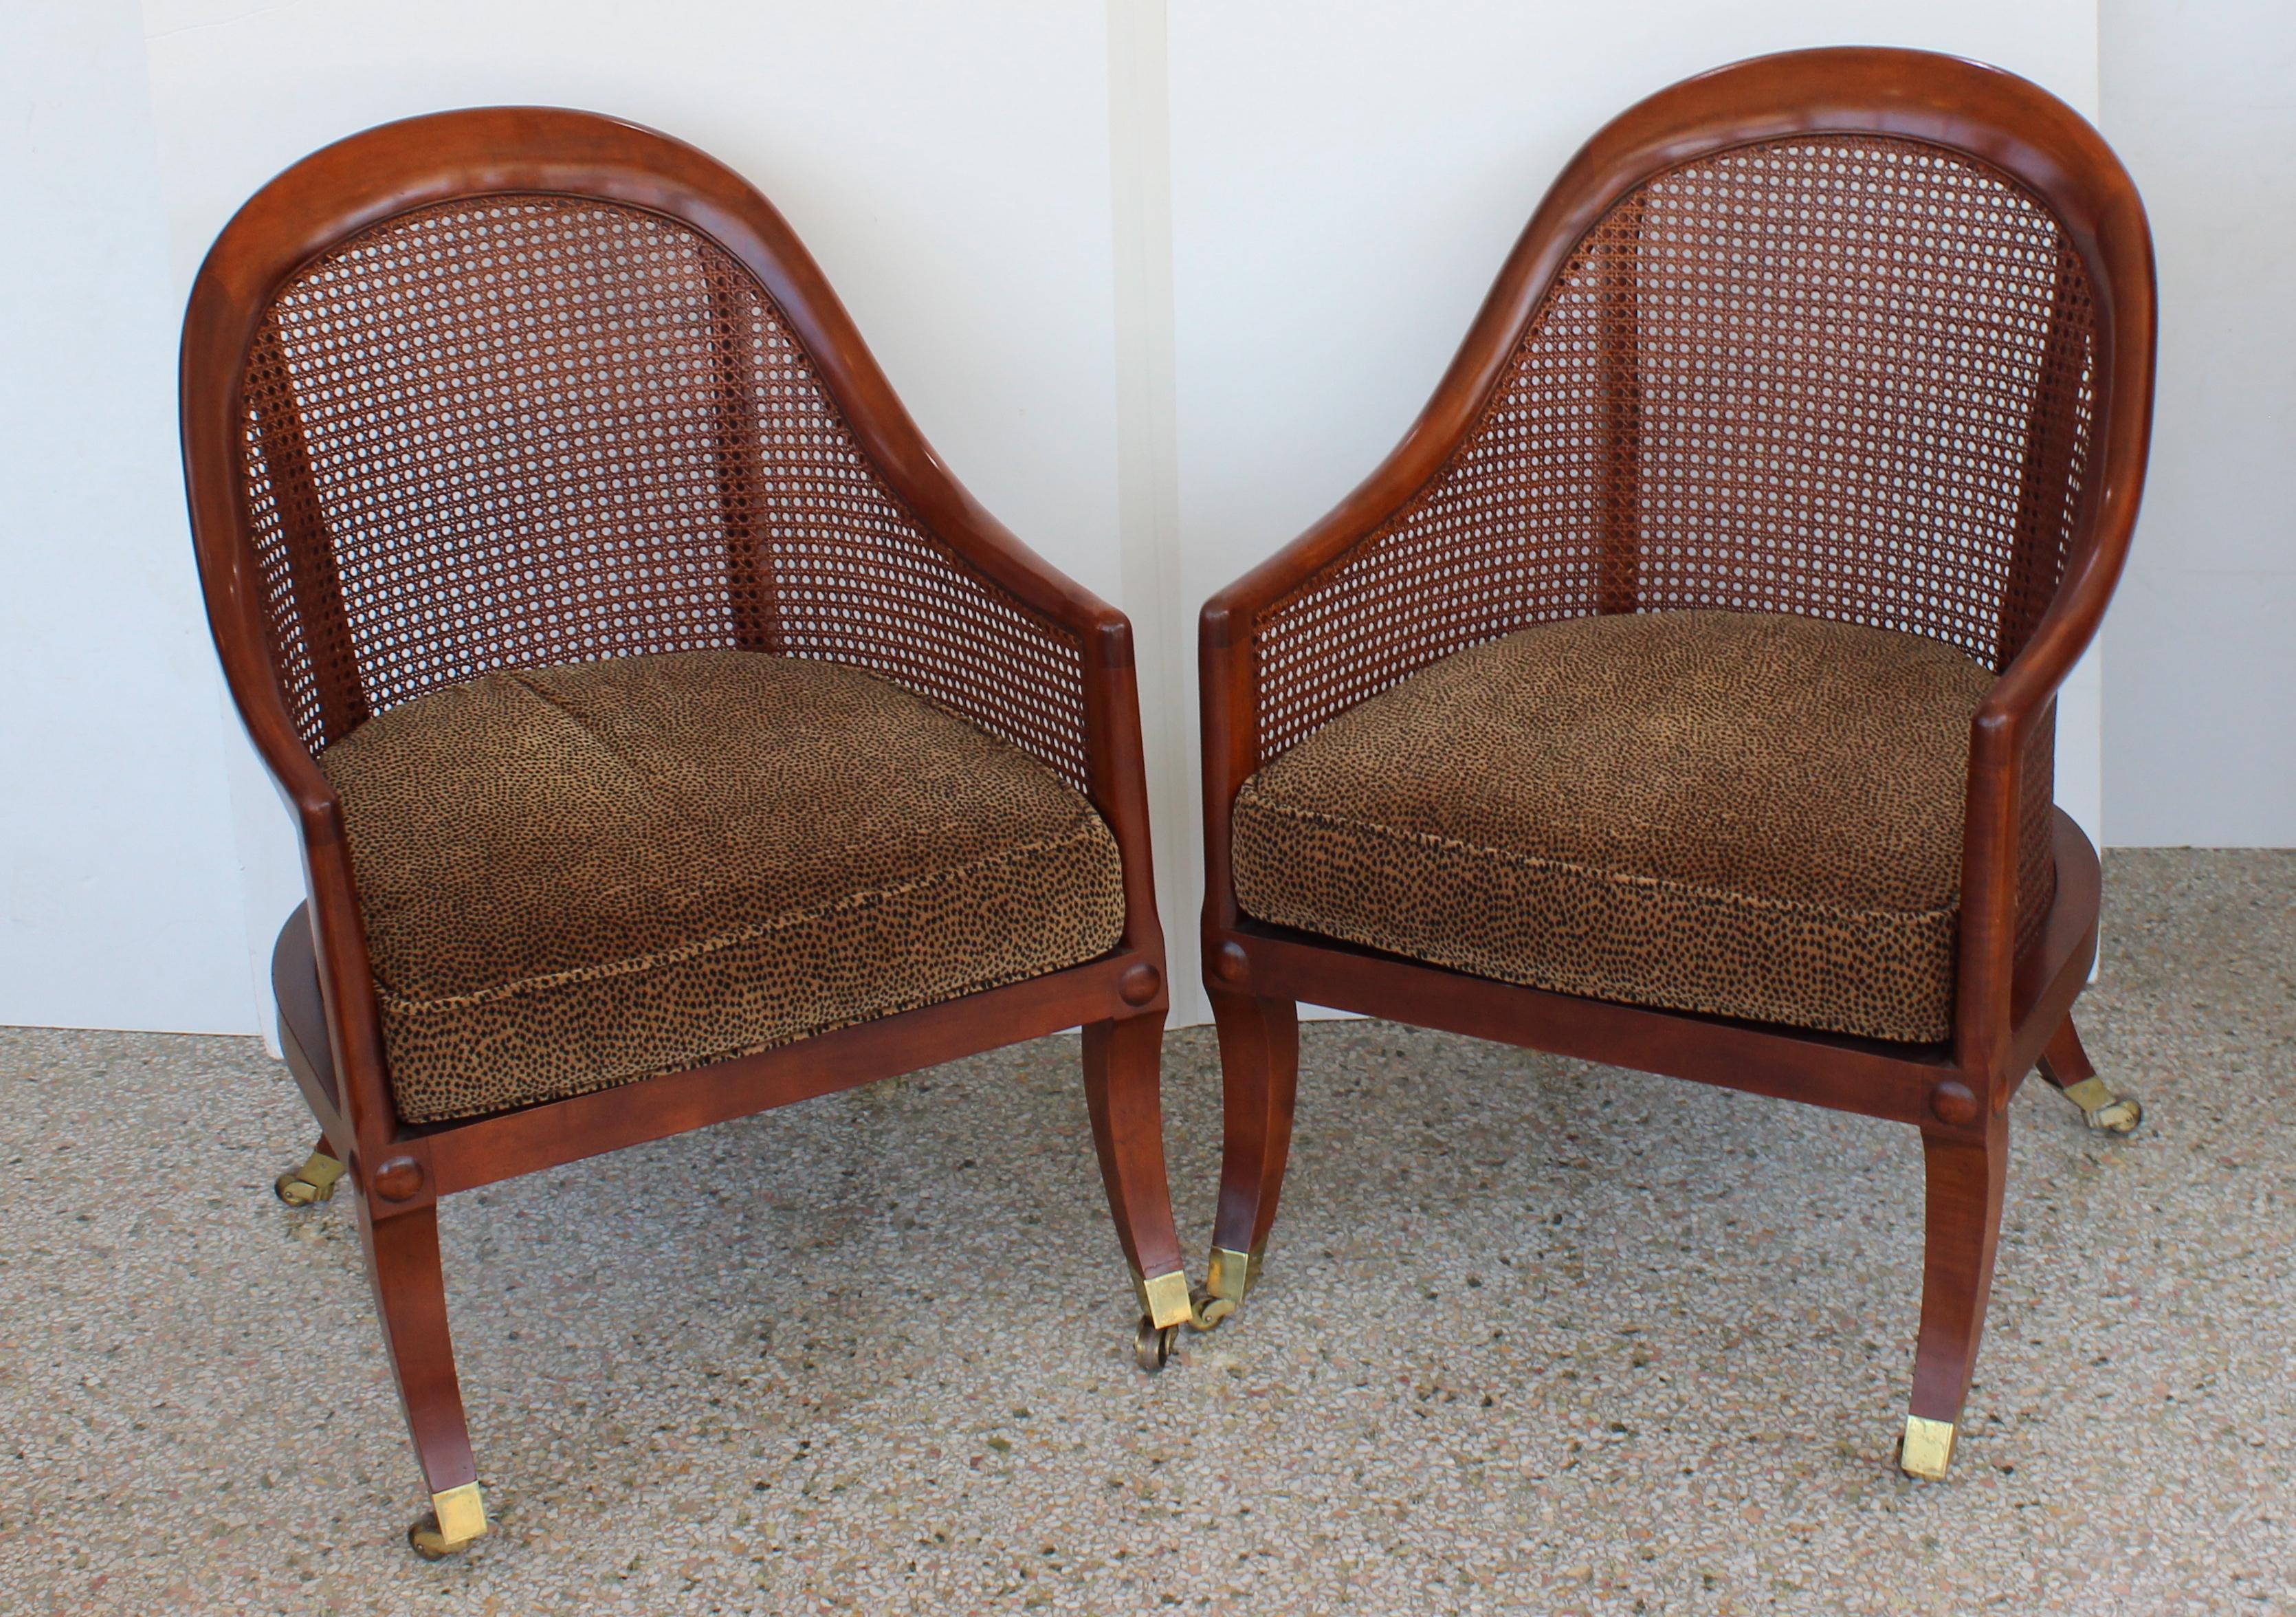 This stylish pair of English Regency style chairs date to the 1980s and were sold by Baker Furniture.

Note: The seat cushion has a hidden zippper. 

Note: There are another pair of identical chairs from our gallery also listed on the Dibs